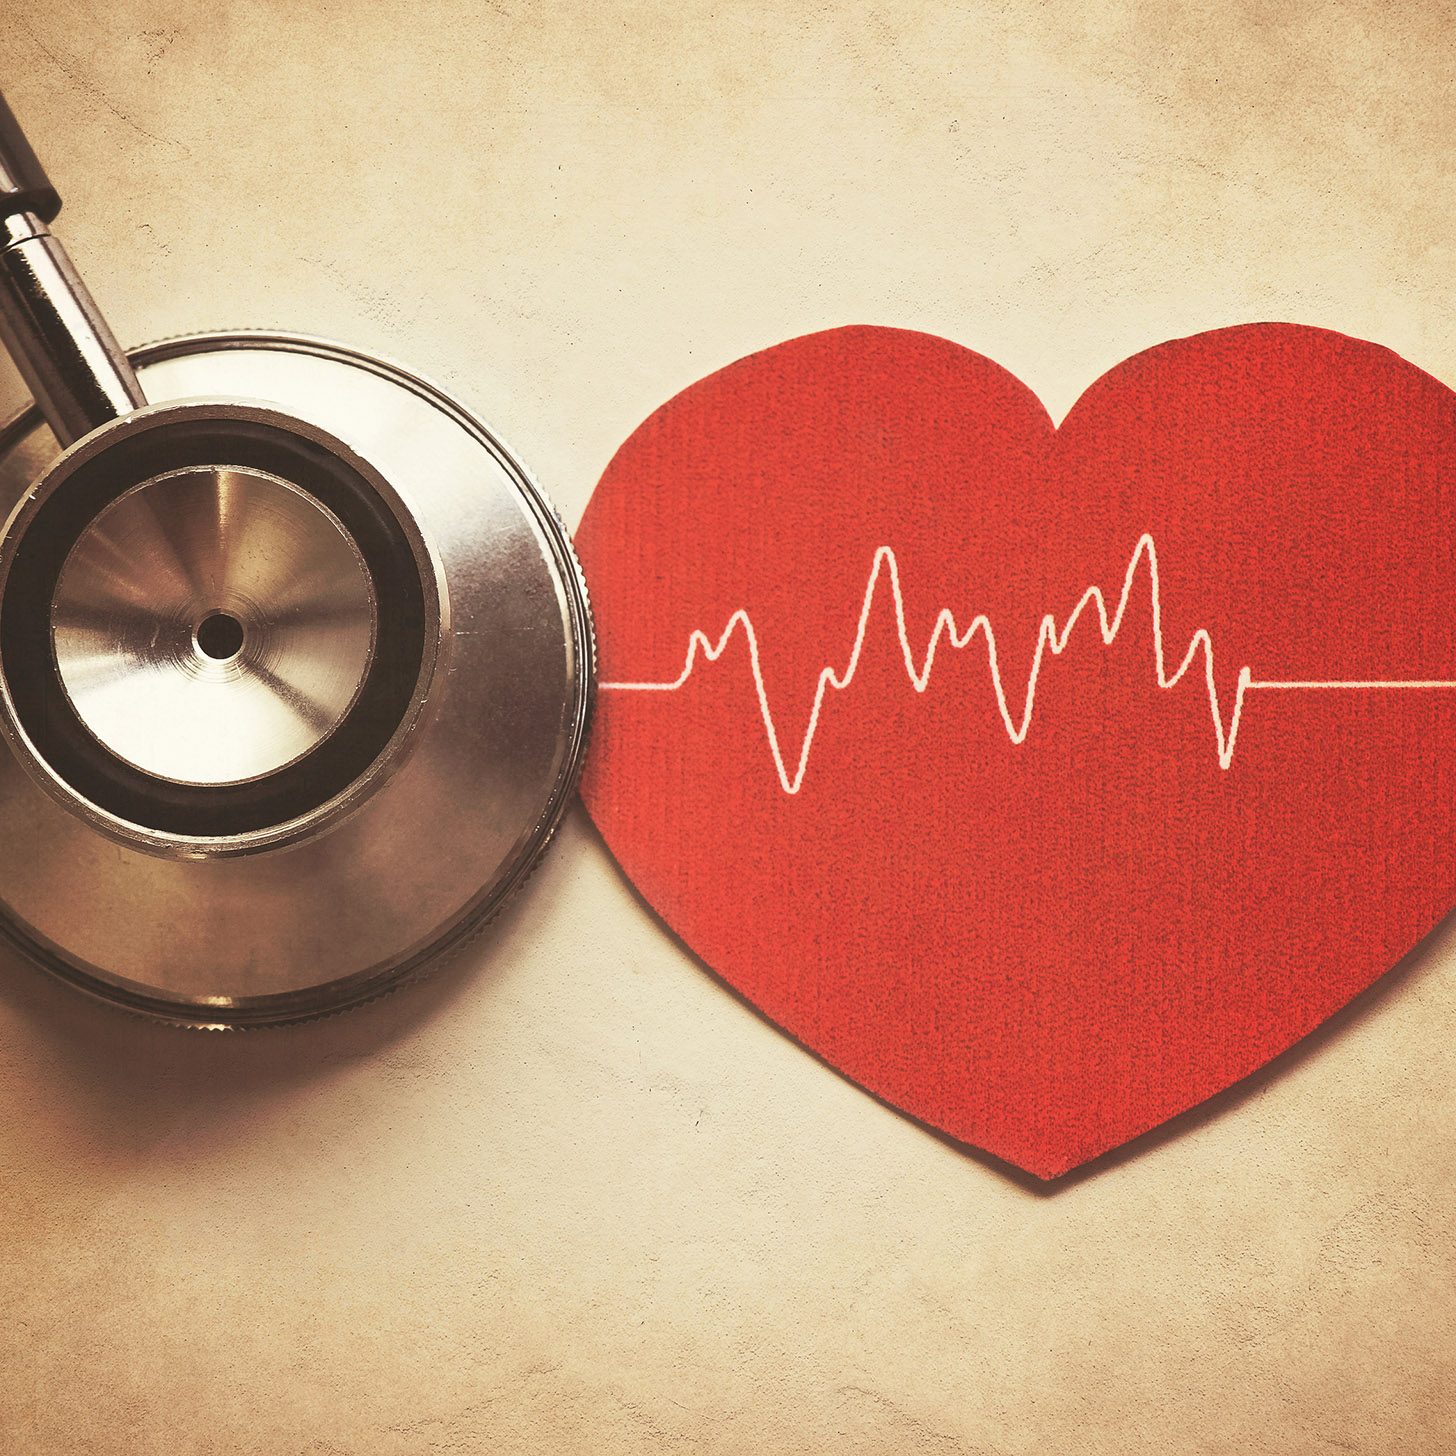 heart and stethoscope in vintage style